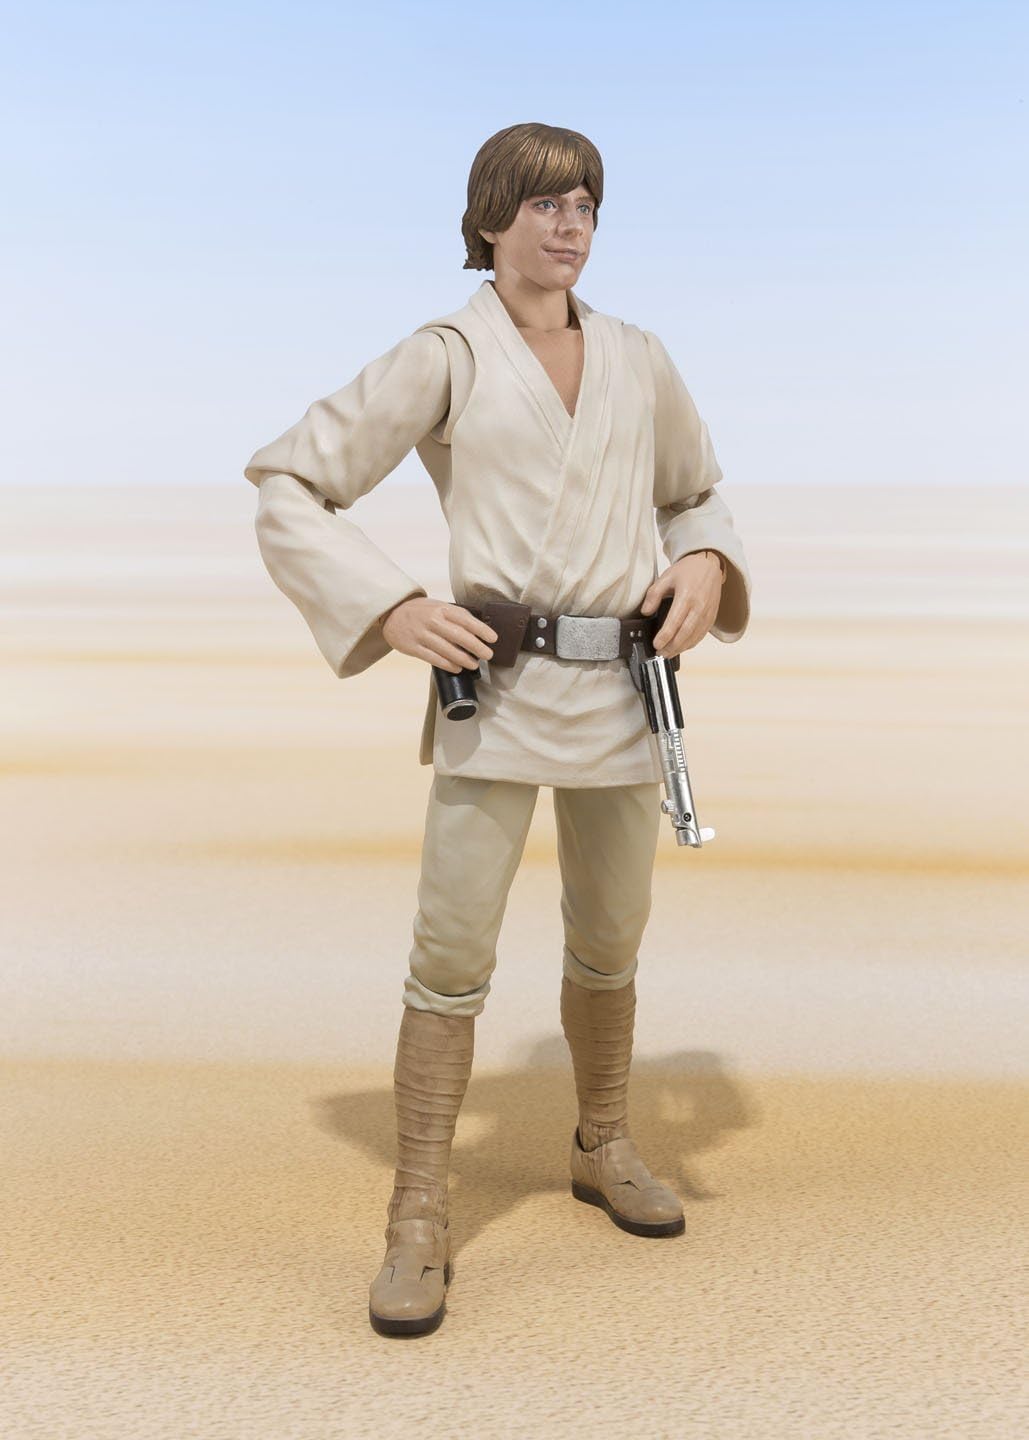 SH Figuarts Star Wars: Episode IV A New Hope Luke Skywalker (A NEW HOPE) (Resale version) Approx. 150mm ABS&PVC painted movable figure - BanzaiHobby